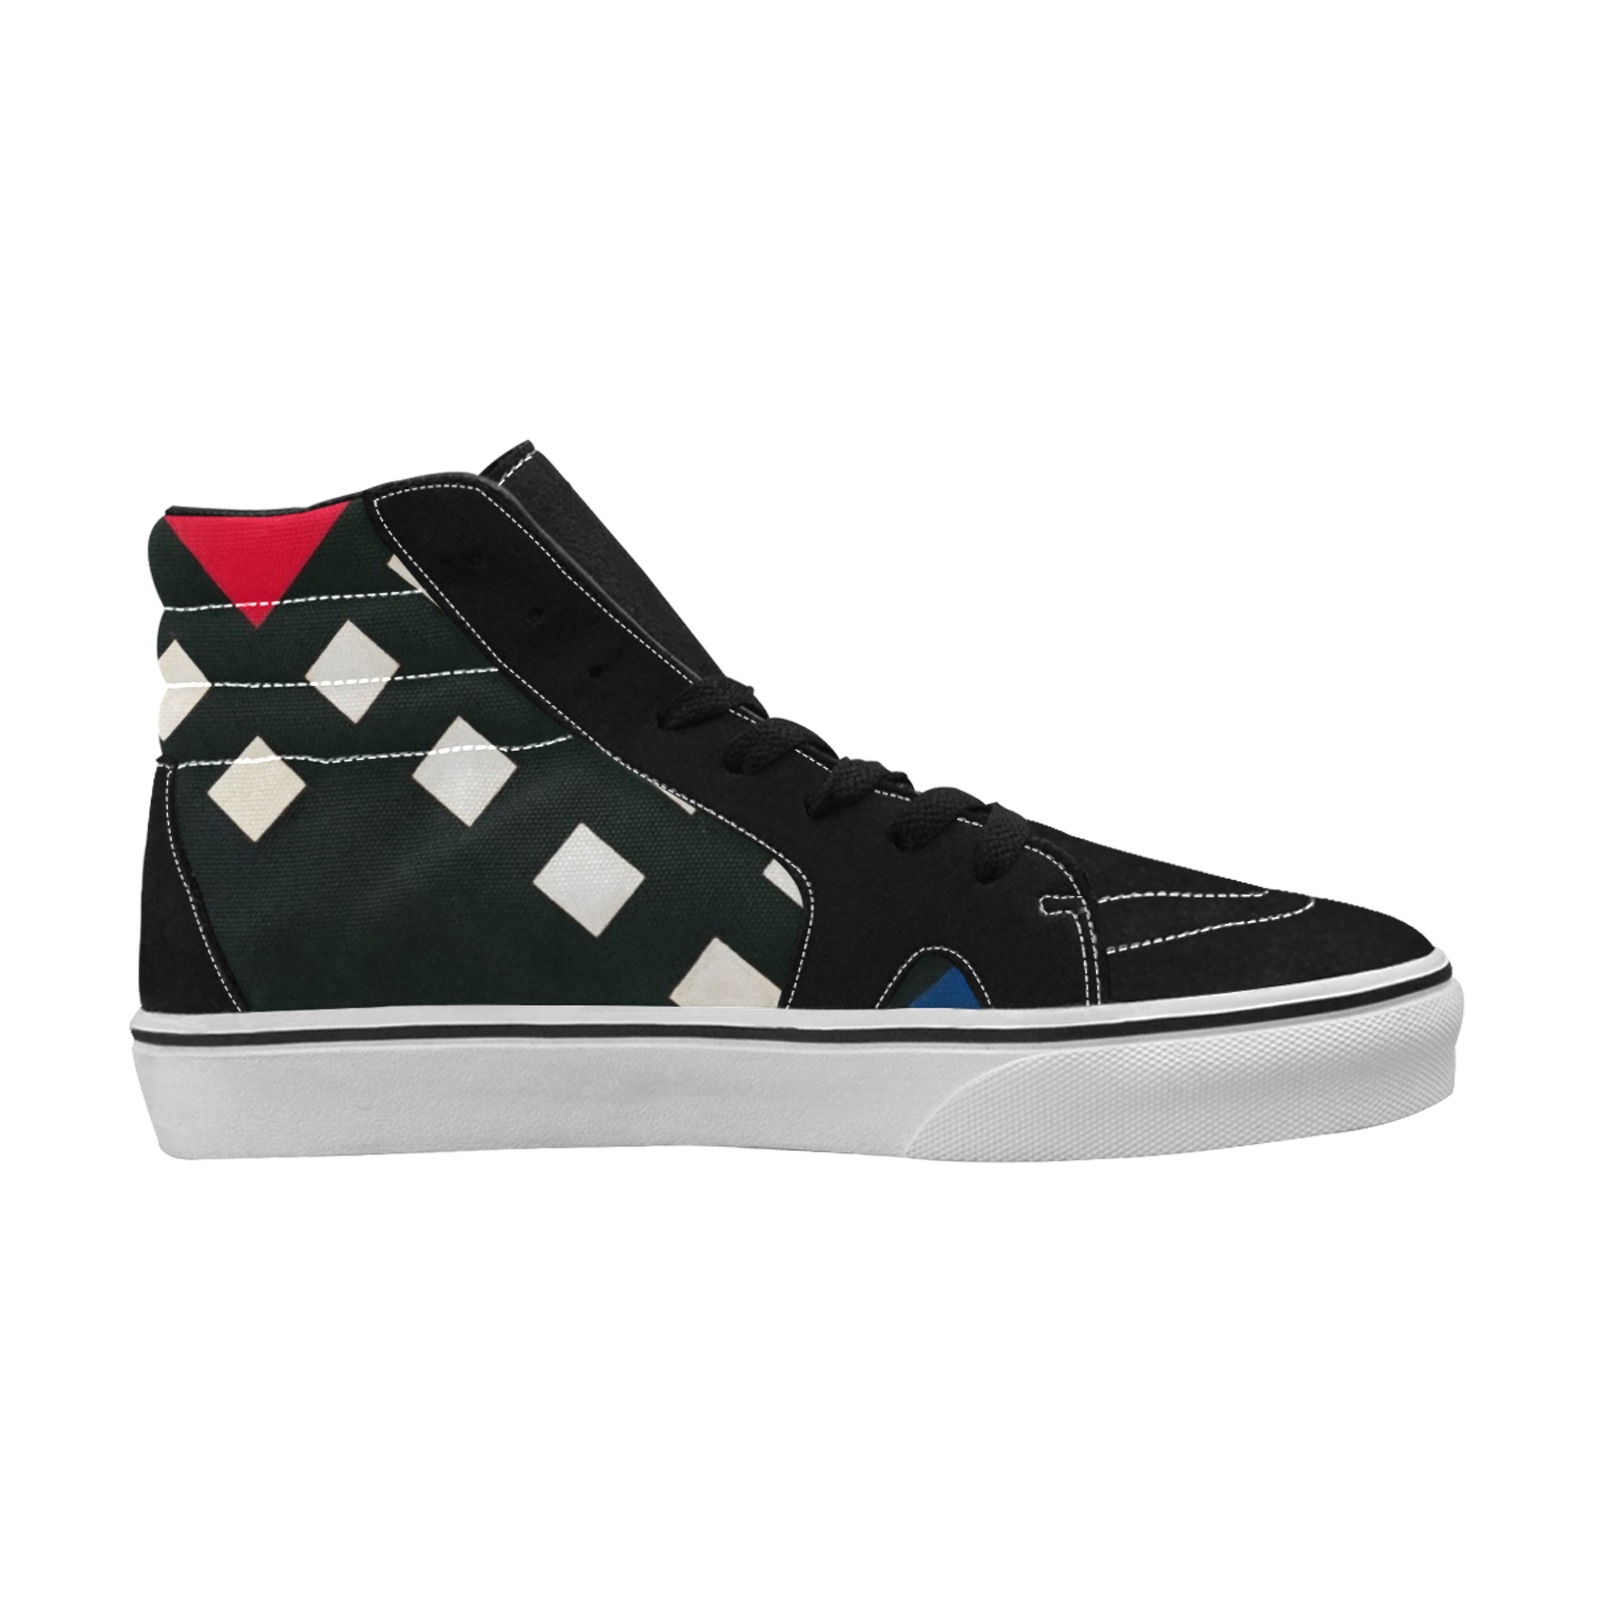 Counter-composition XV by Theo van Doesburg- Women's High Top Skateboarding Shoes (Model E001-1)